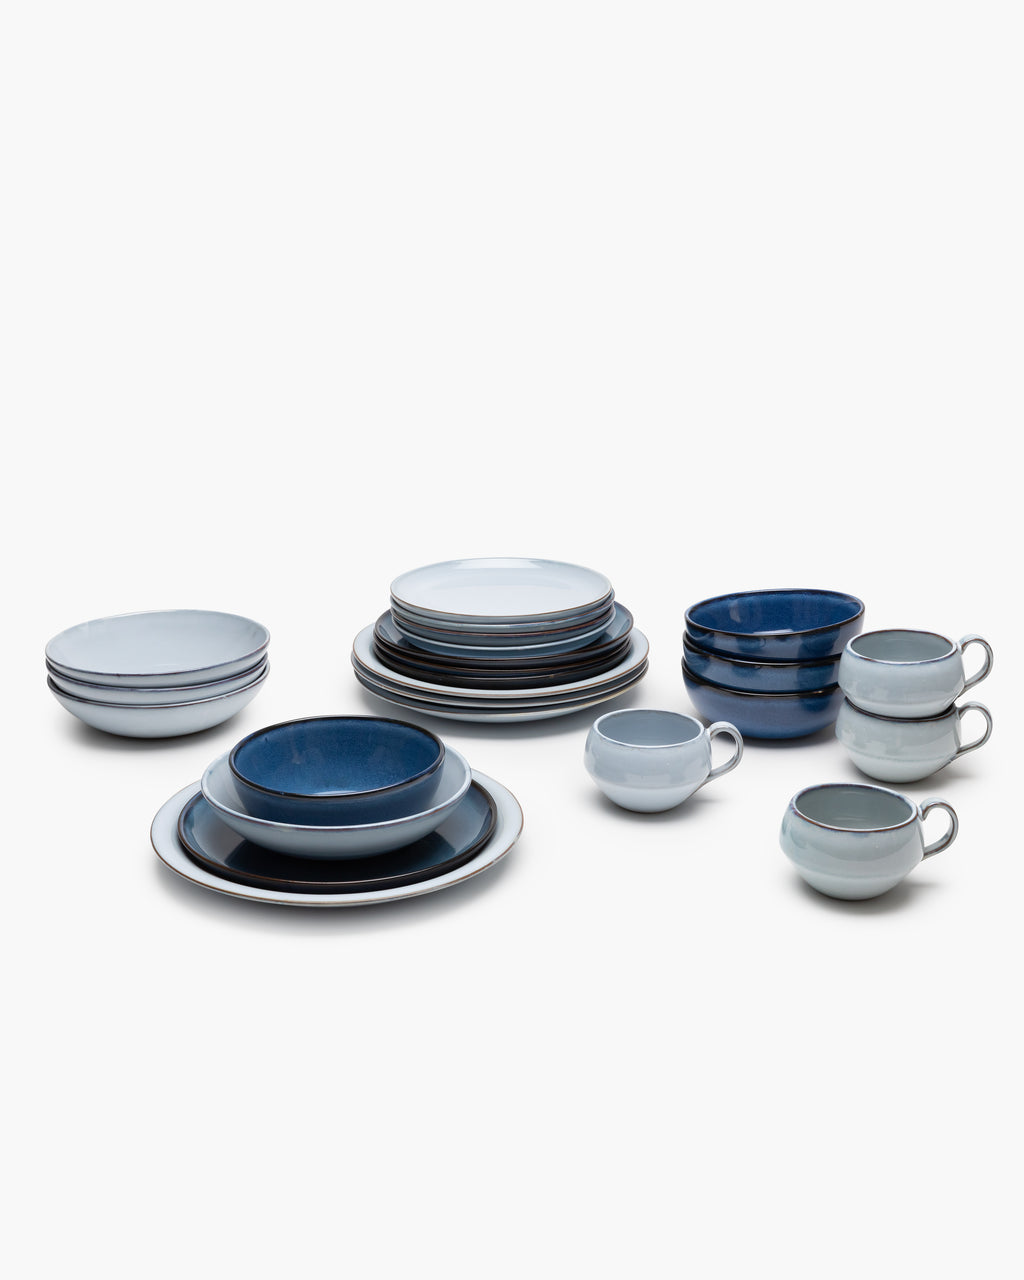 Full Set 24 pieces - Pure tableware by Pascale Naessens - blue